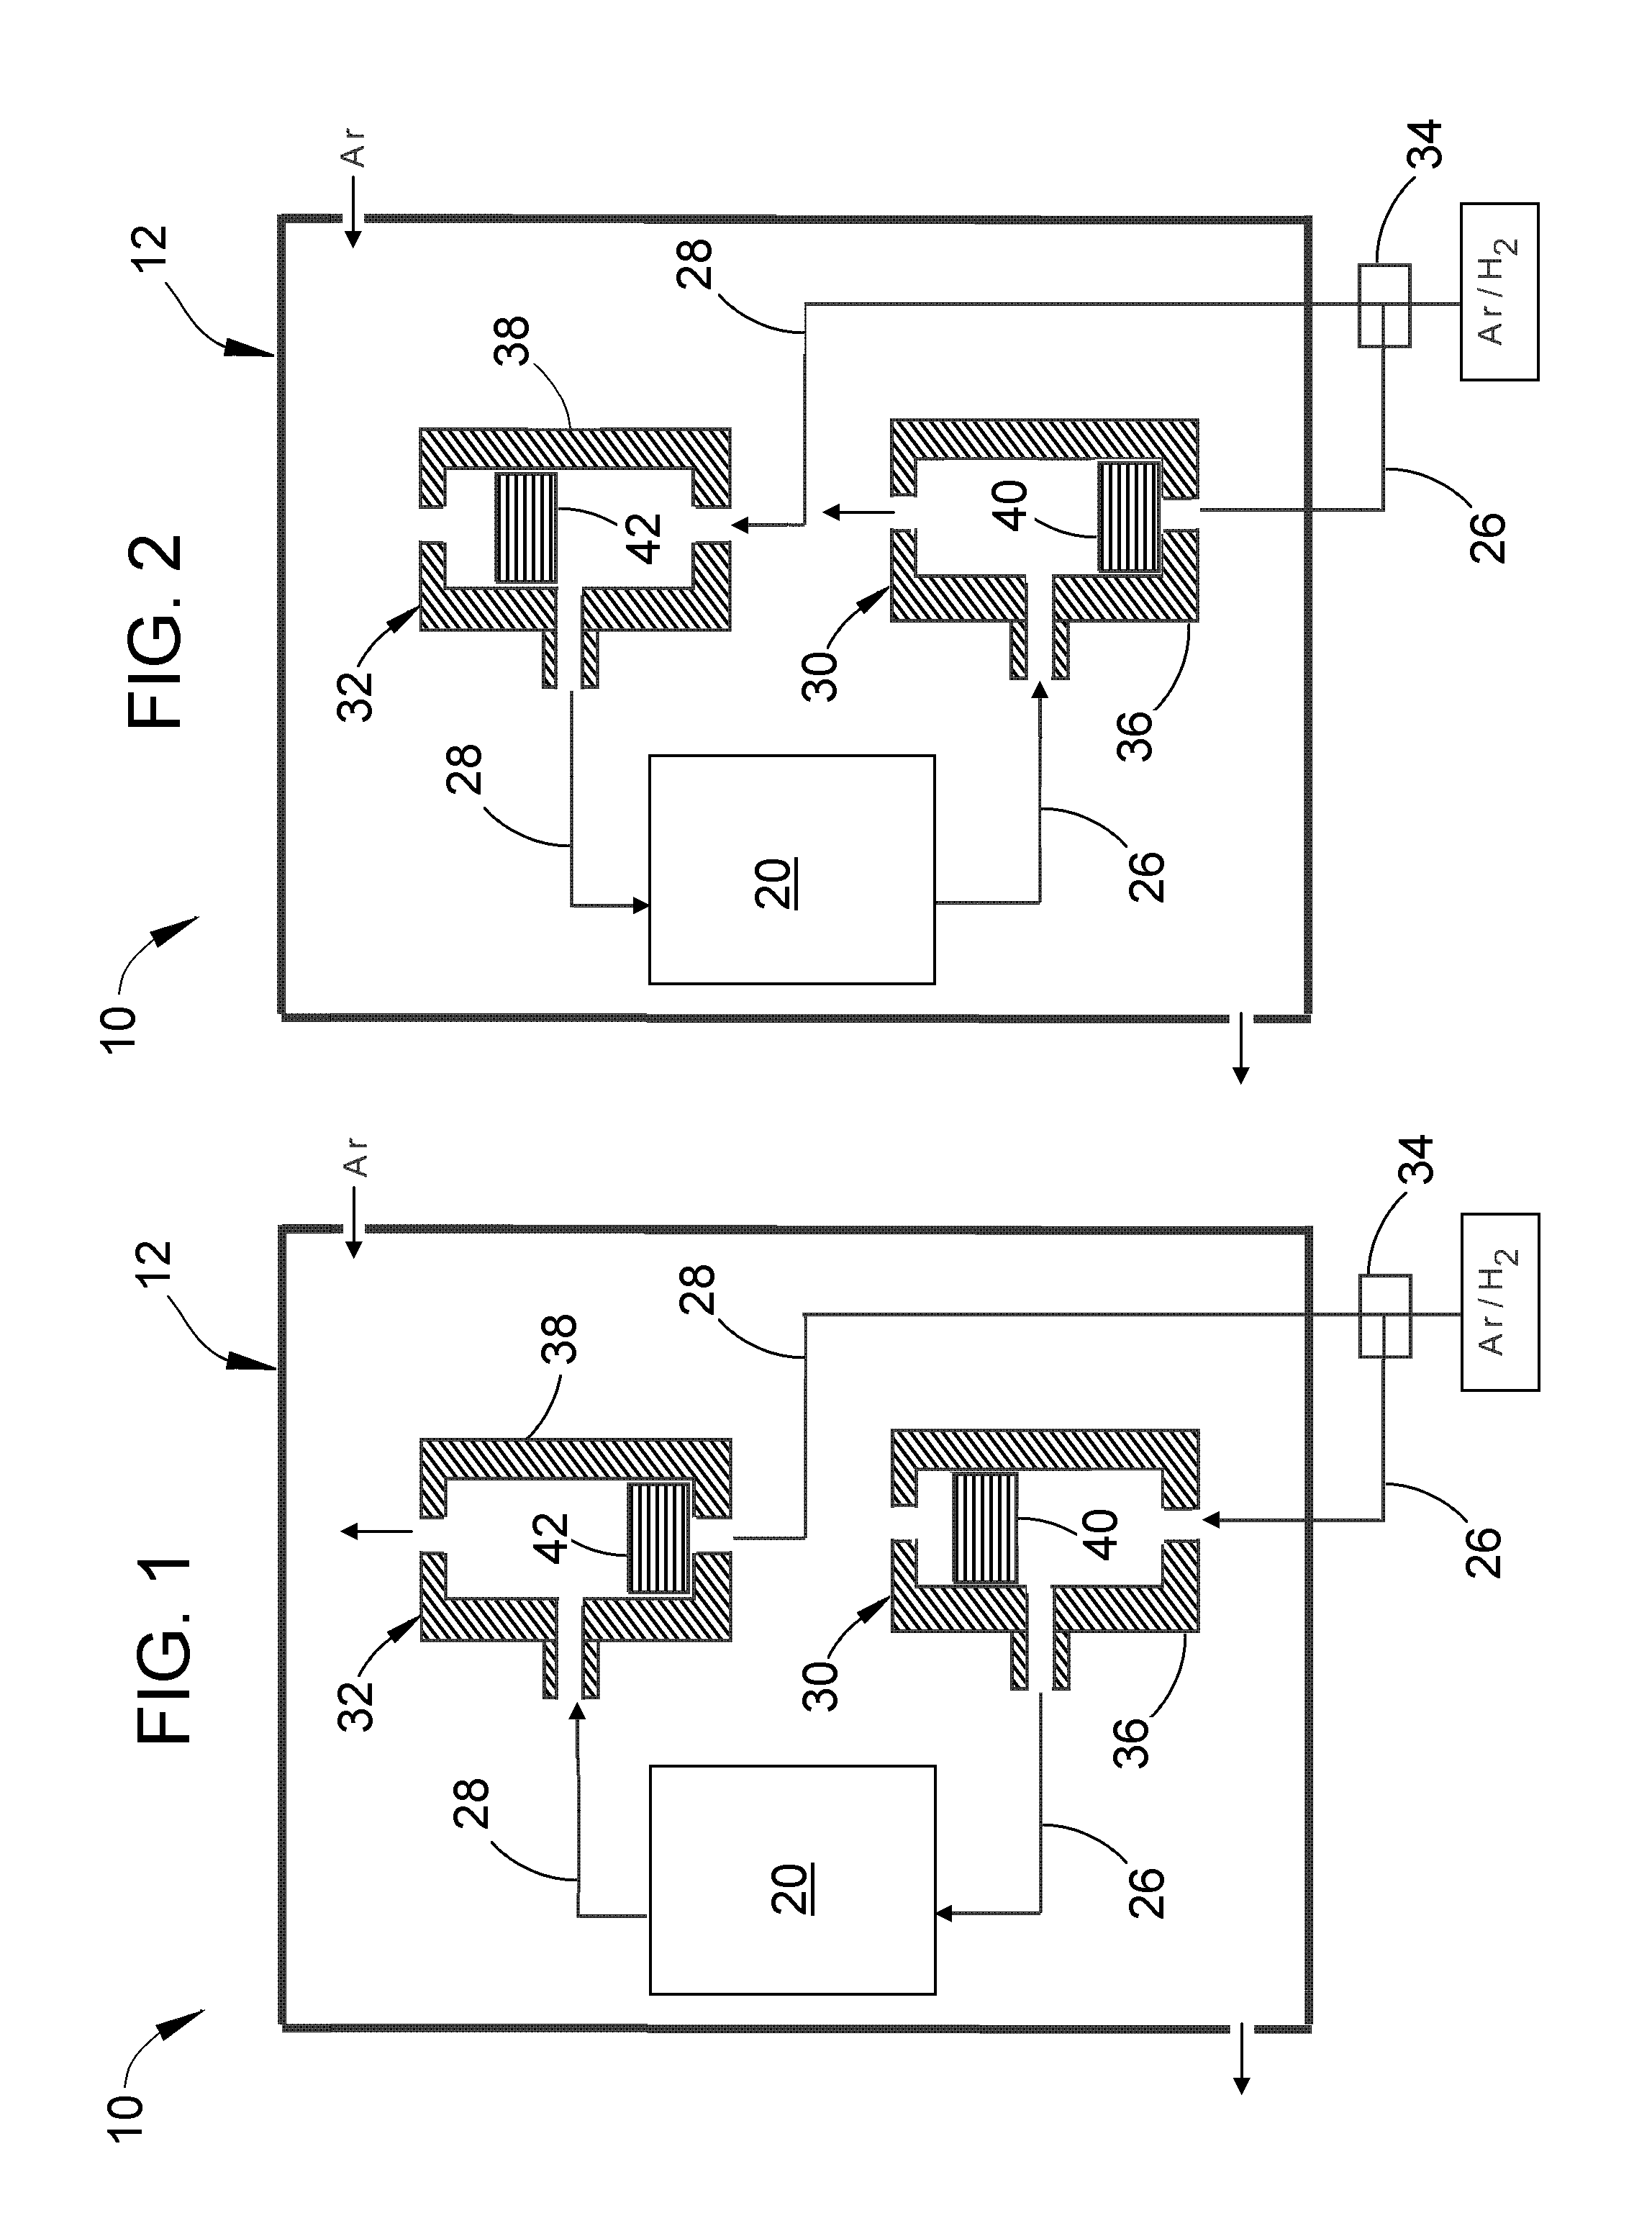 Method and apparatus for controlling diffusion coating of internal passages